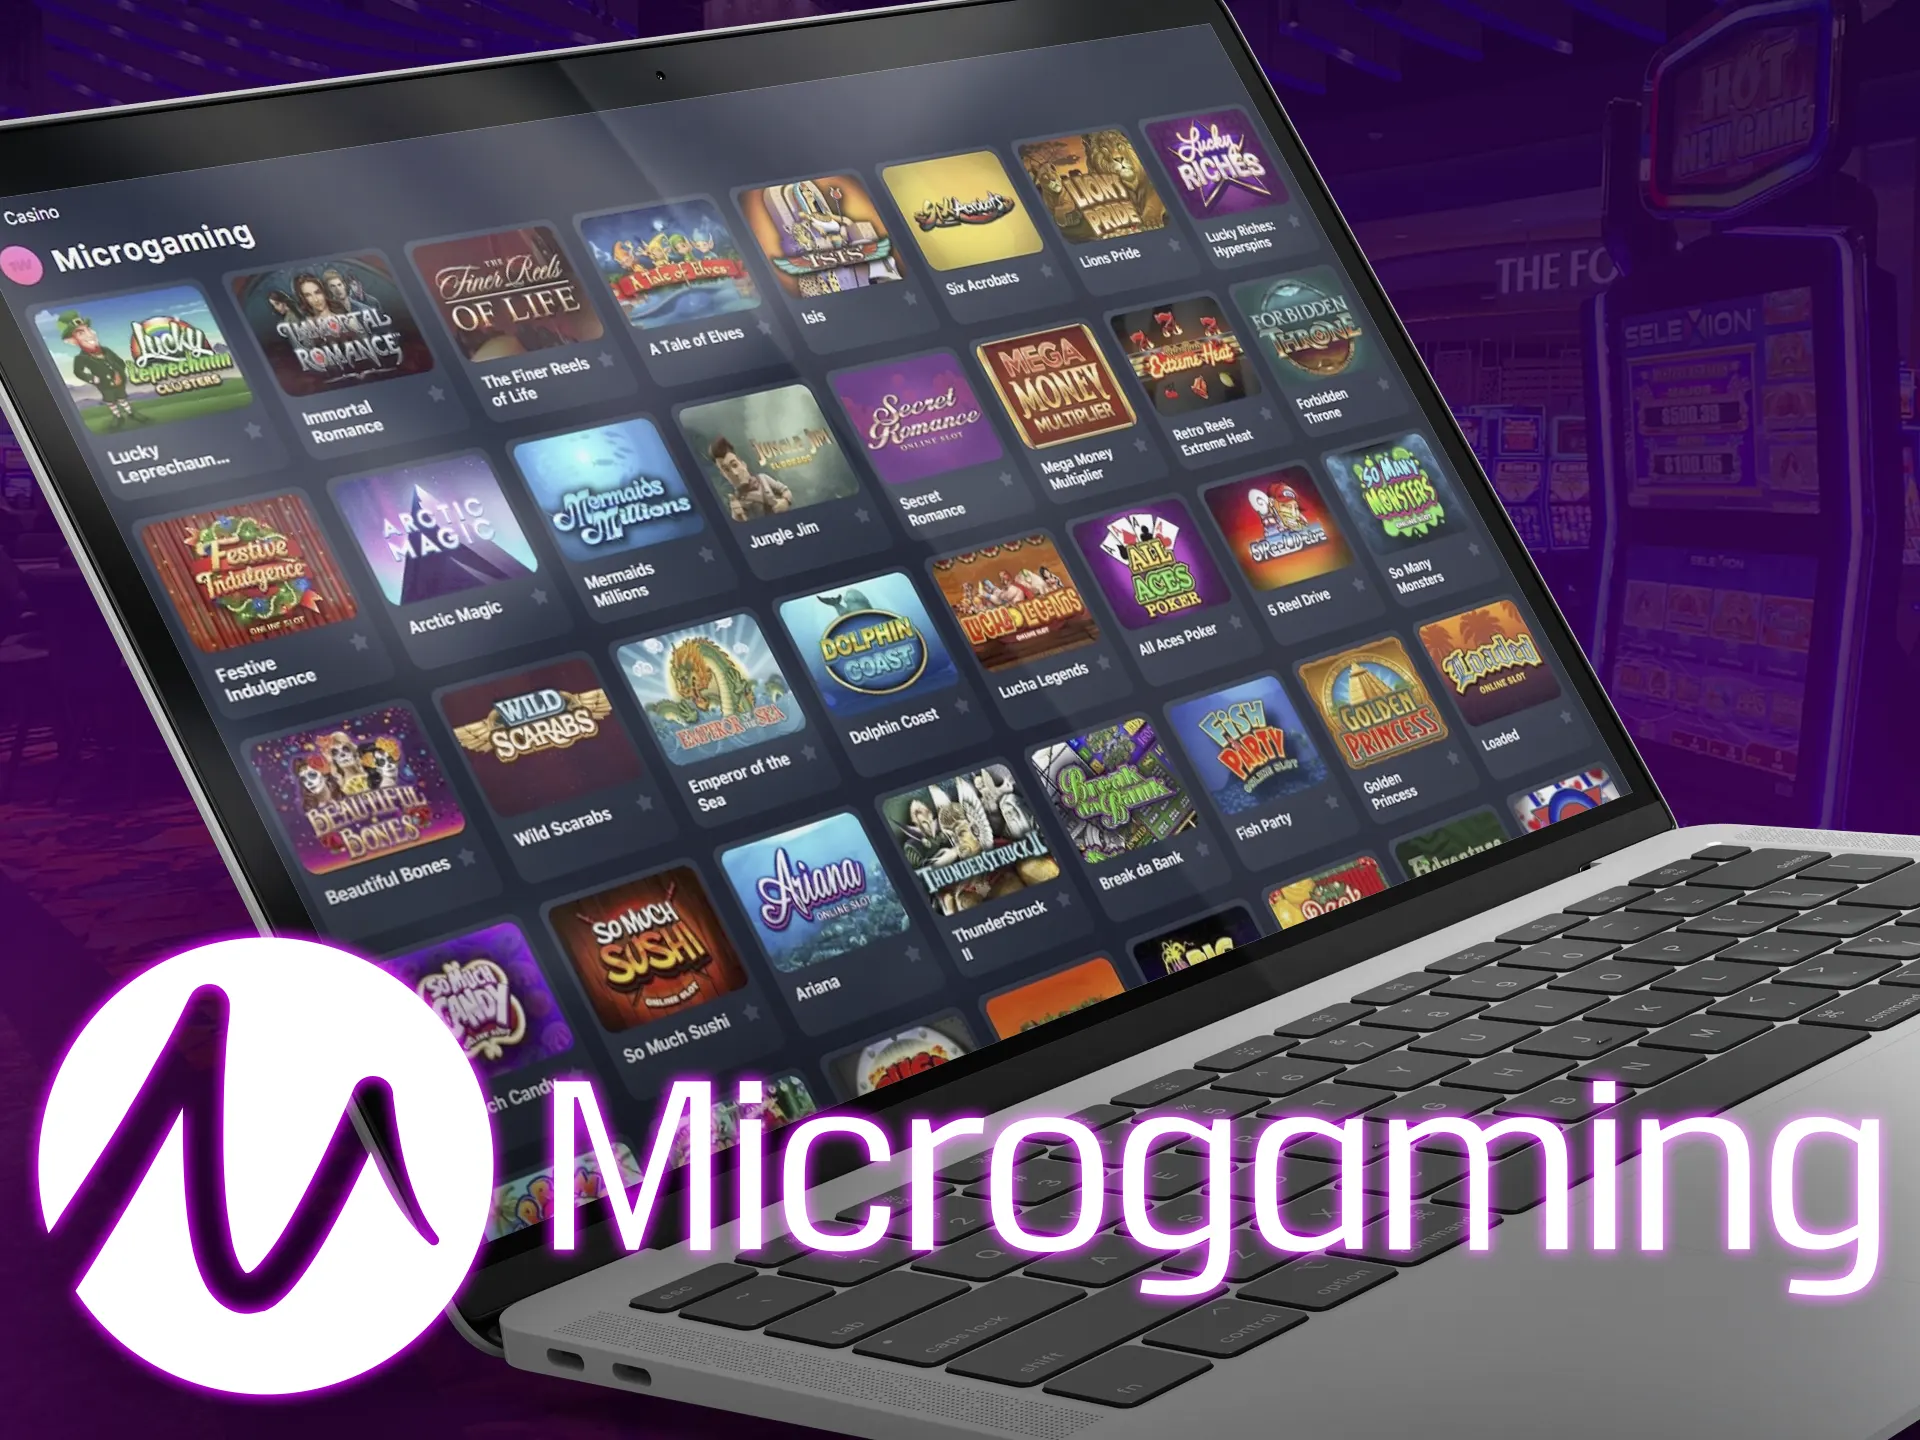 Microgaming is well-known provider for having over 700 games.